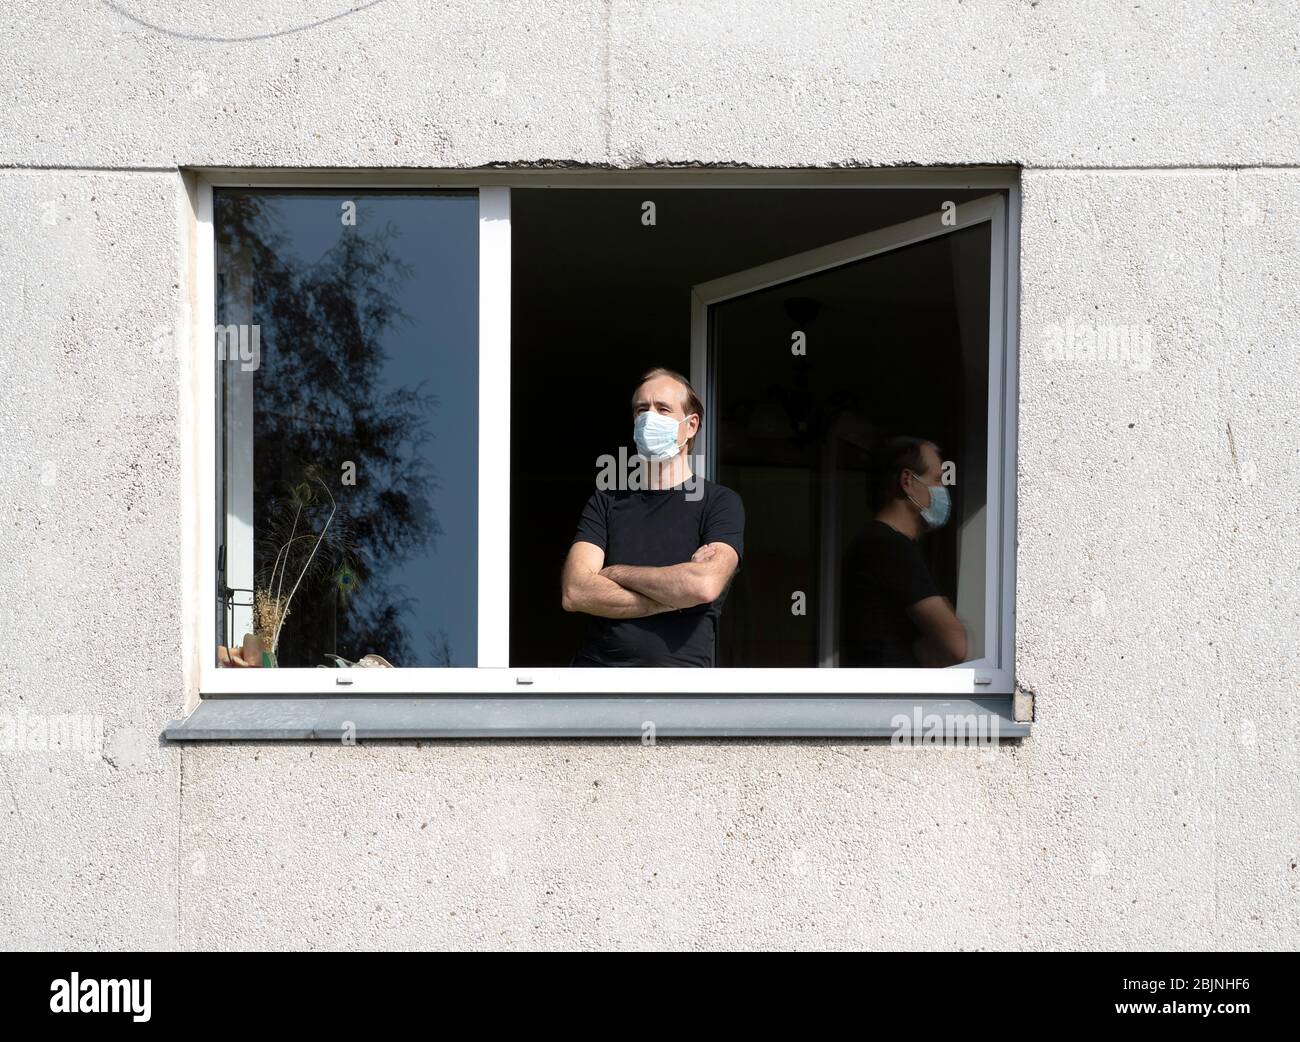 Man wearing a face mask looking out of a window, Lithuania Stock Photo